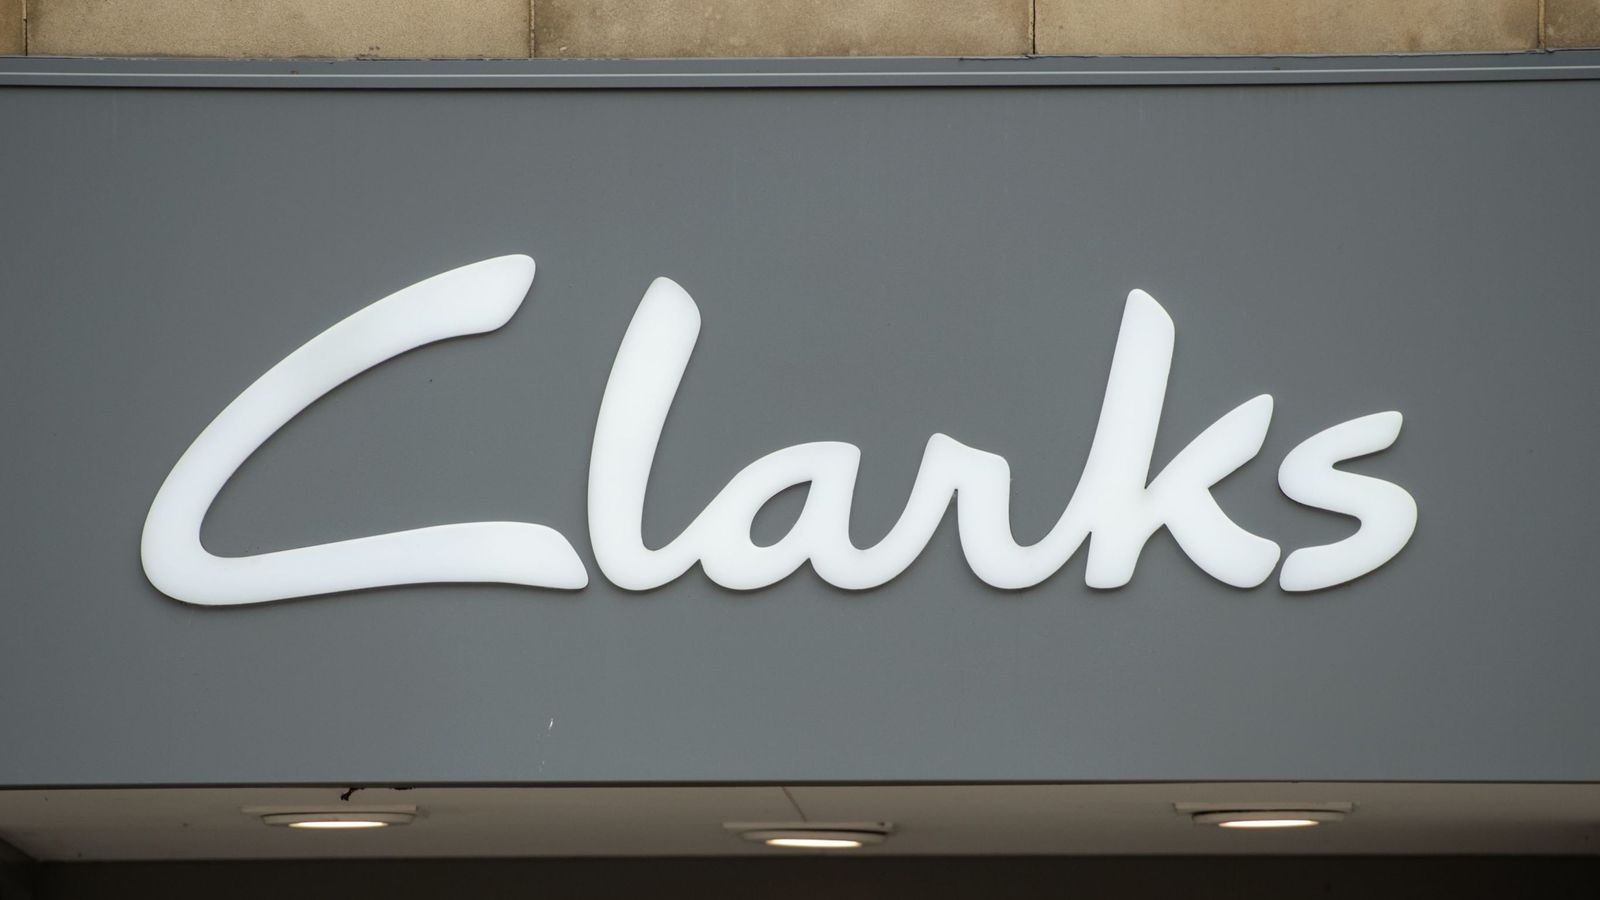 clarks brand shoes